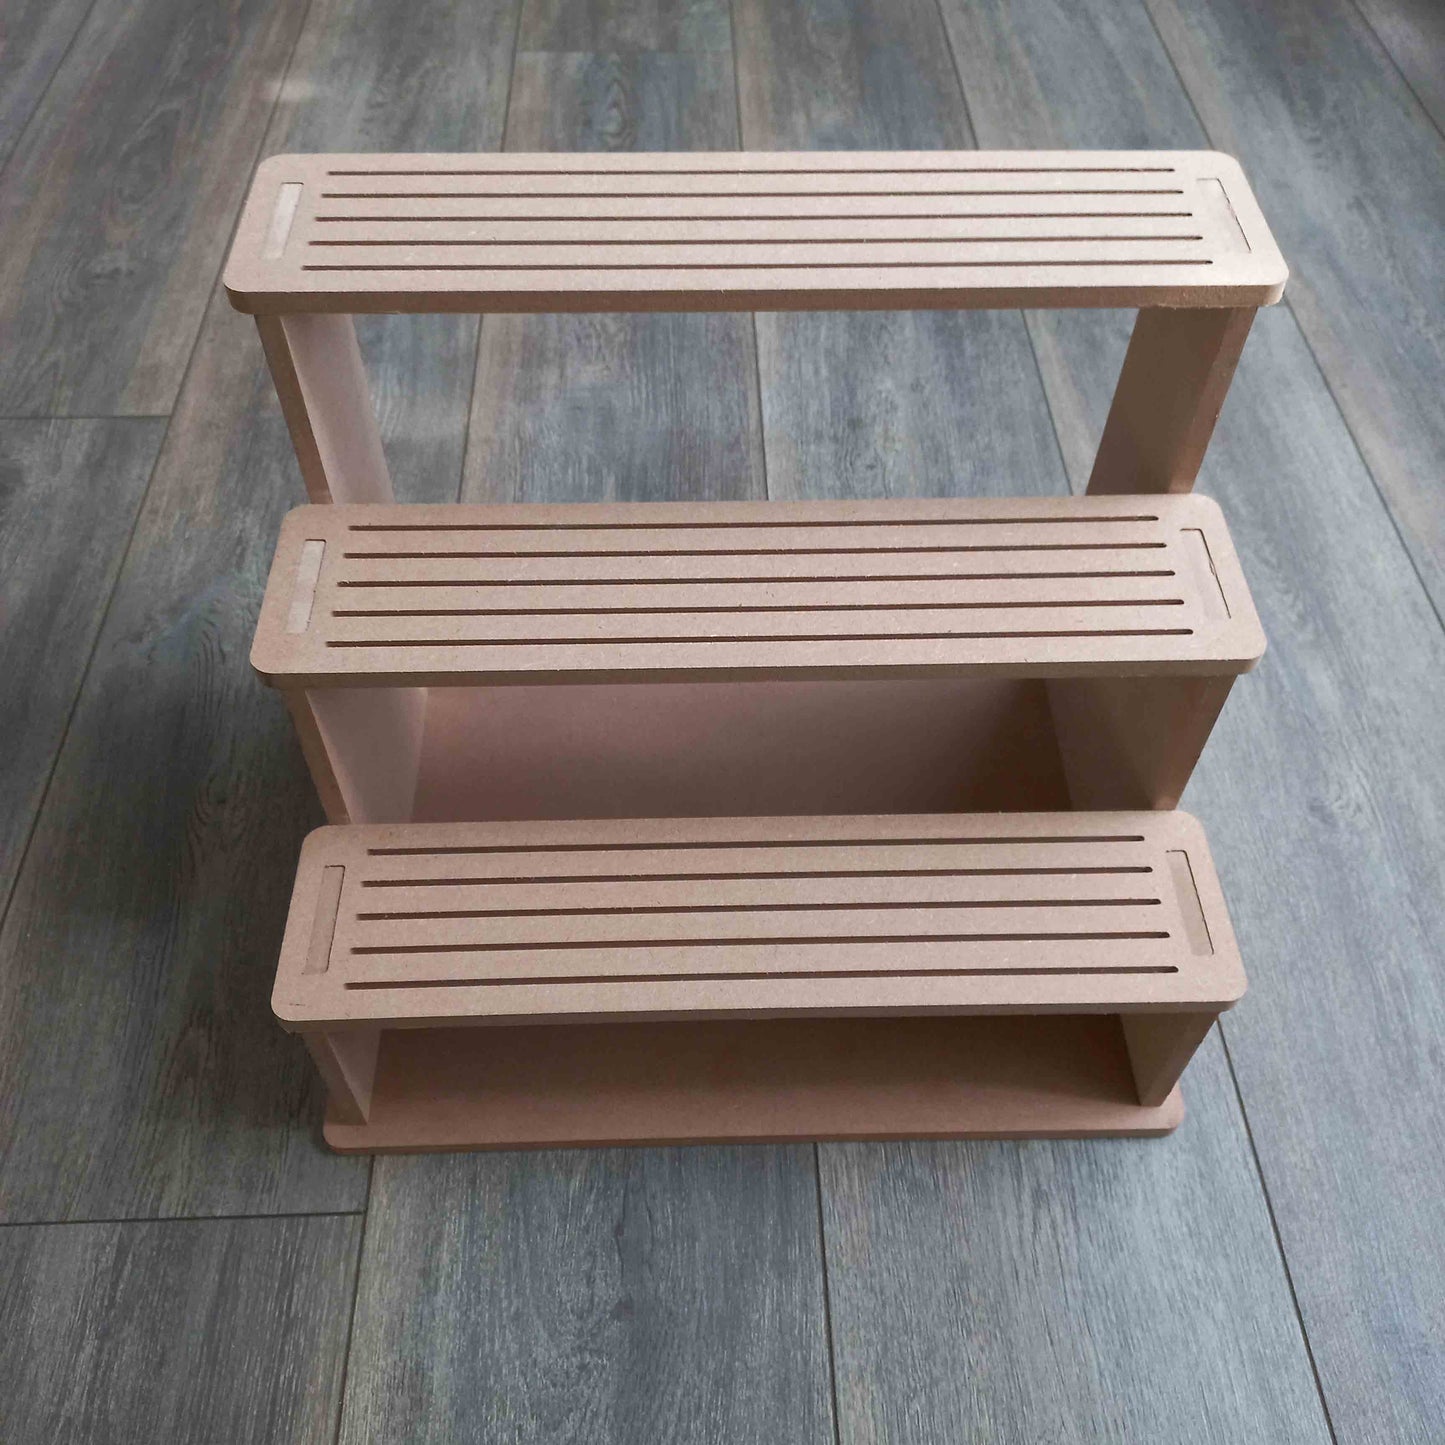 3 or 4 Tier Display Shelf with slots